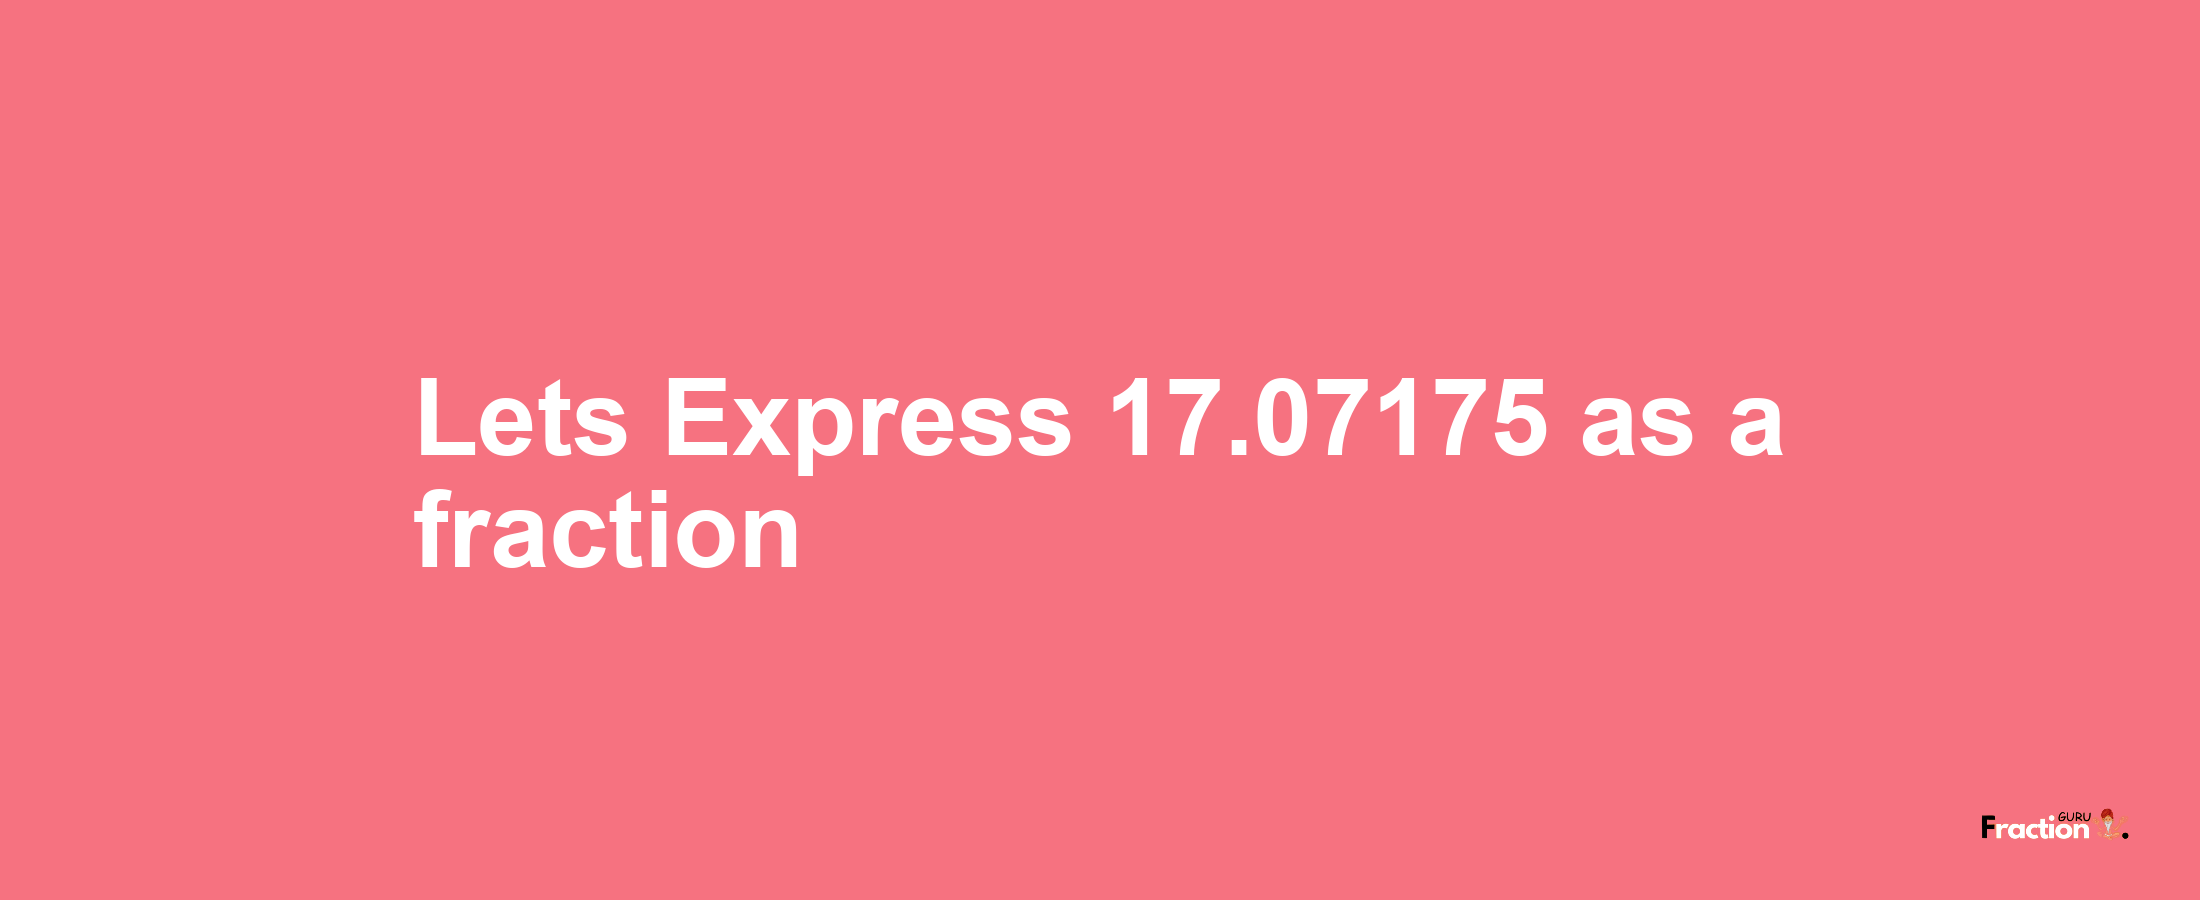 Lets Express 17.07175 as afraction